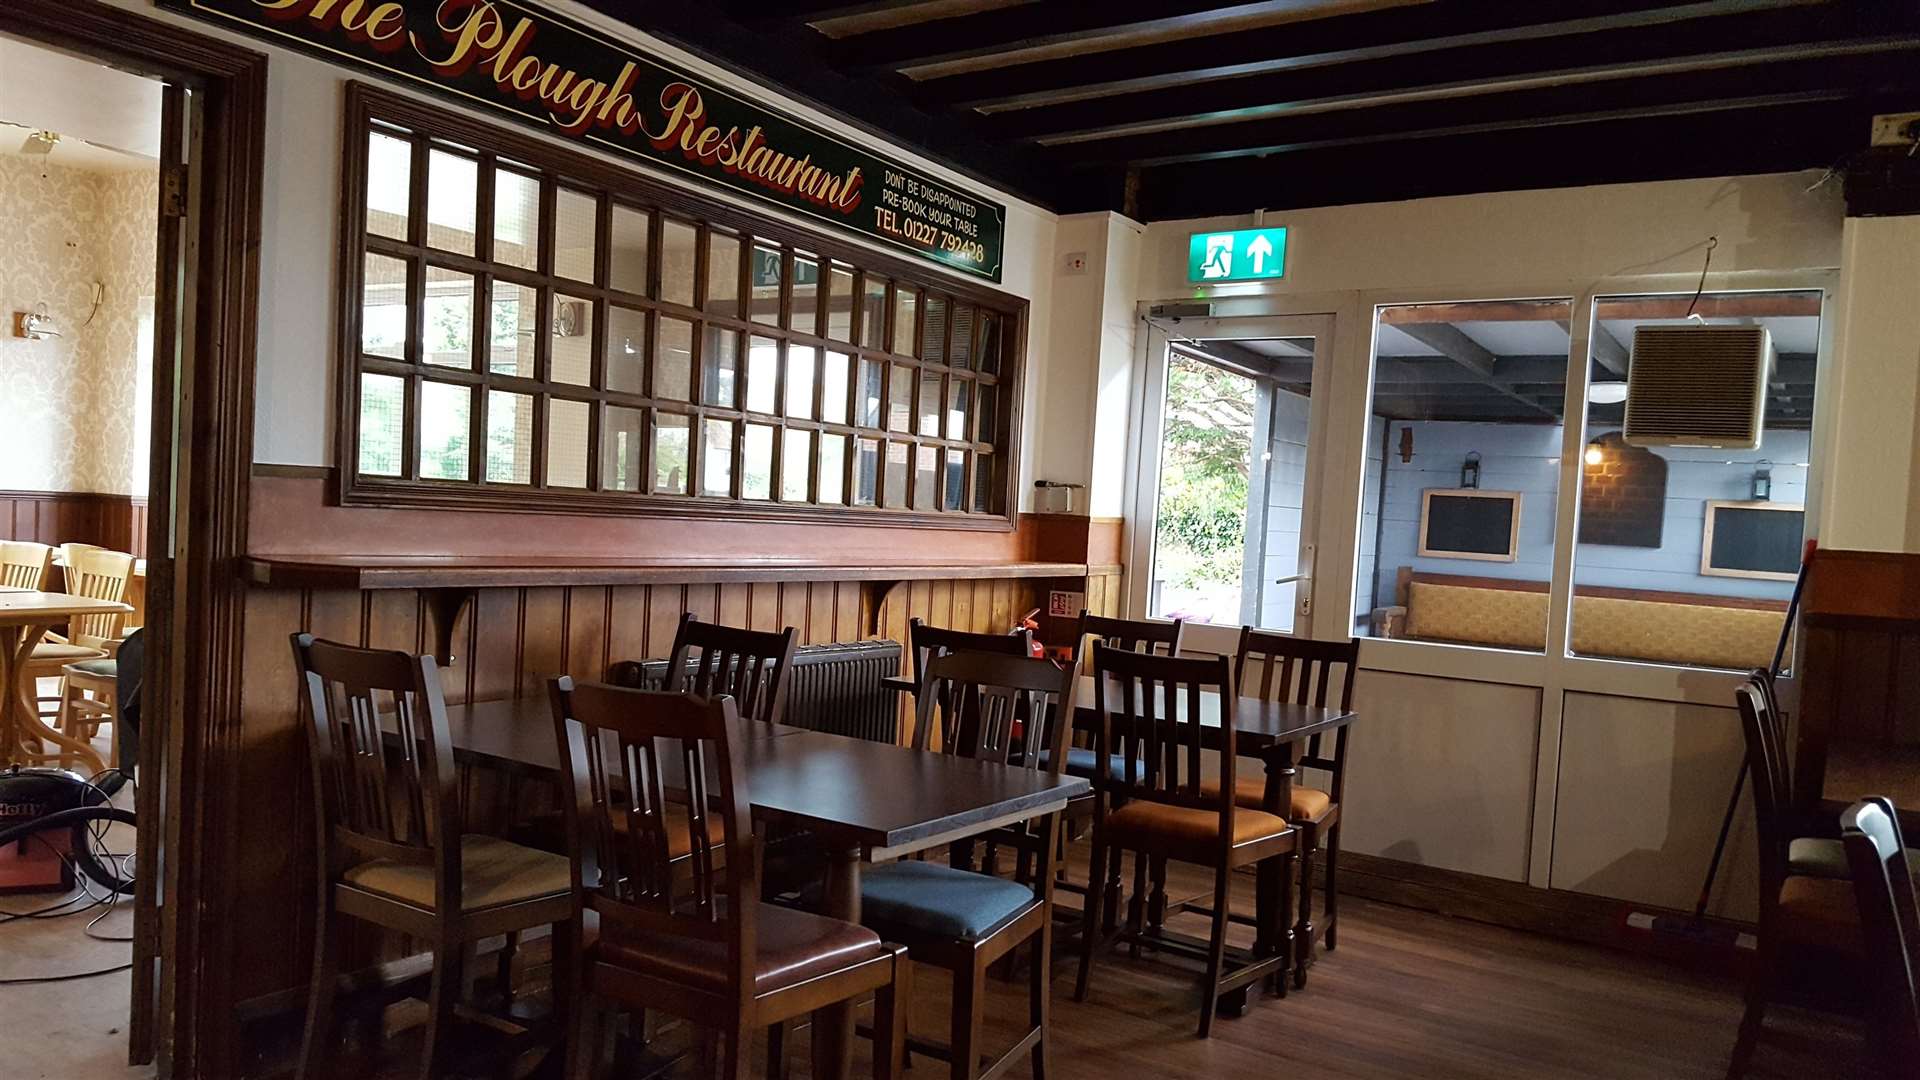 The Swalecliffe pub reopened with a new-look two years ago